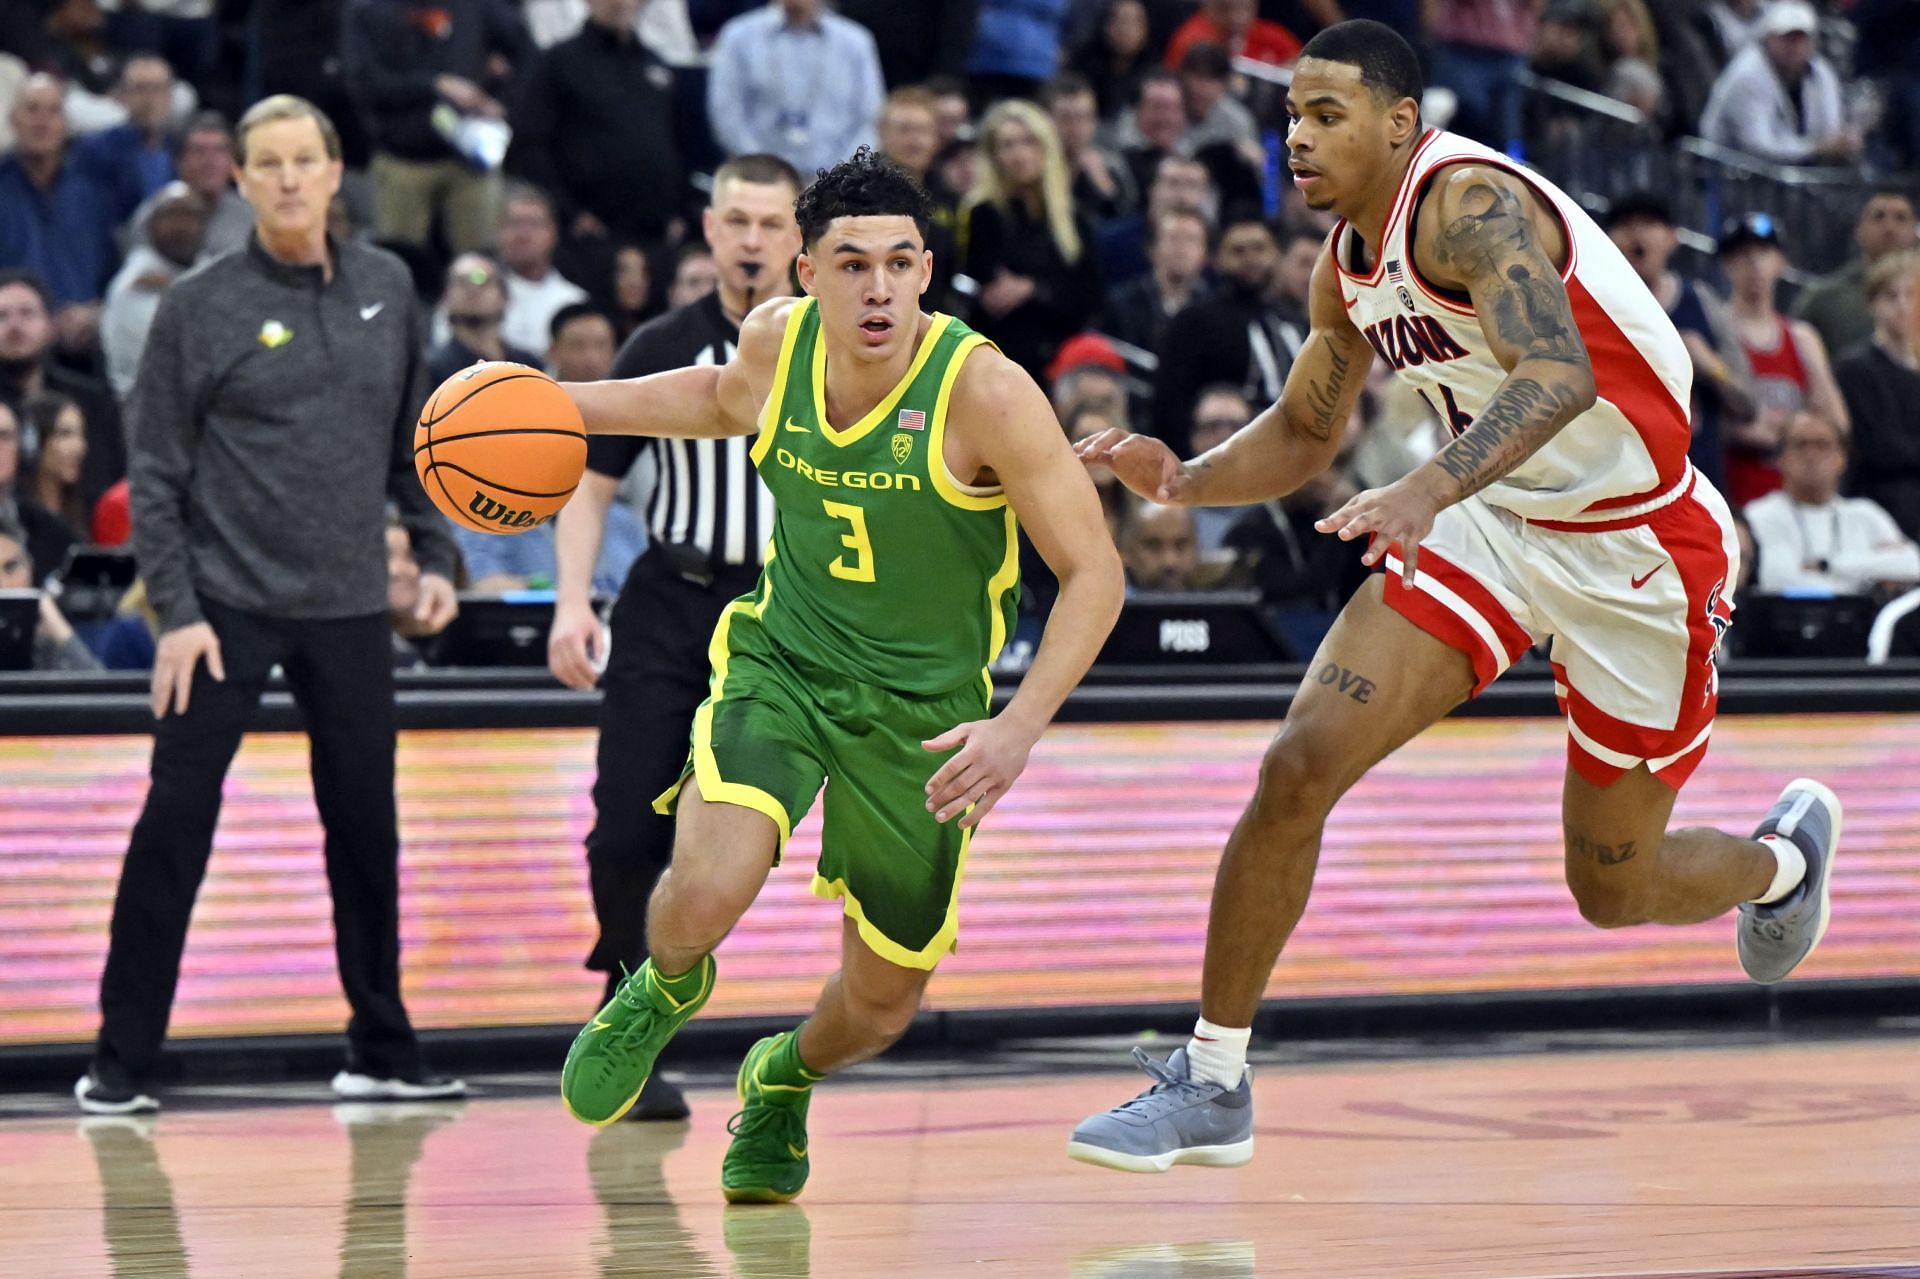 Jackson Shelstad #3 drives to the basket. Shelstad made two free throws in the final seconds to give Oregon a 67-59 win over Arizona in the Pac-12 Tournament semifinal.